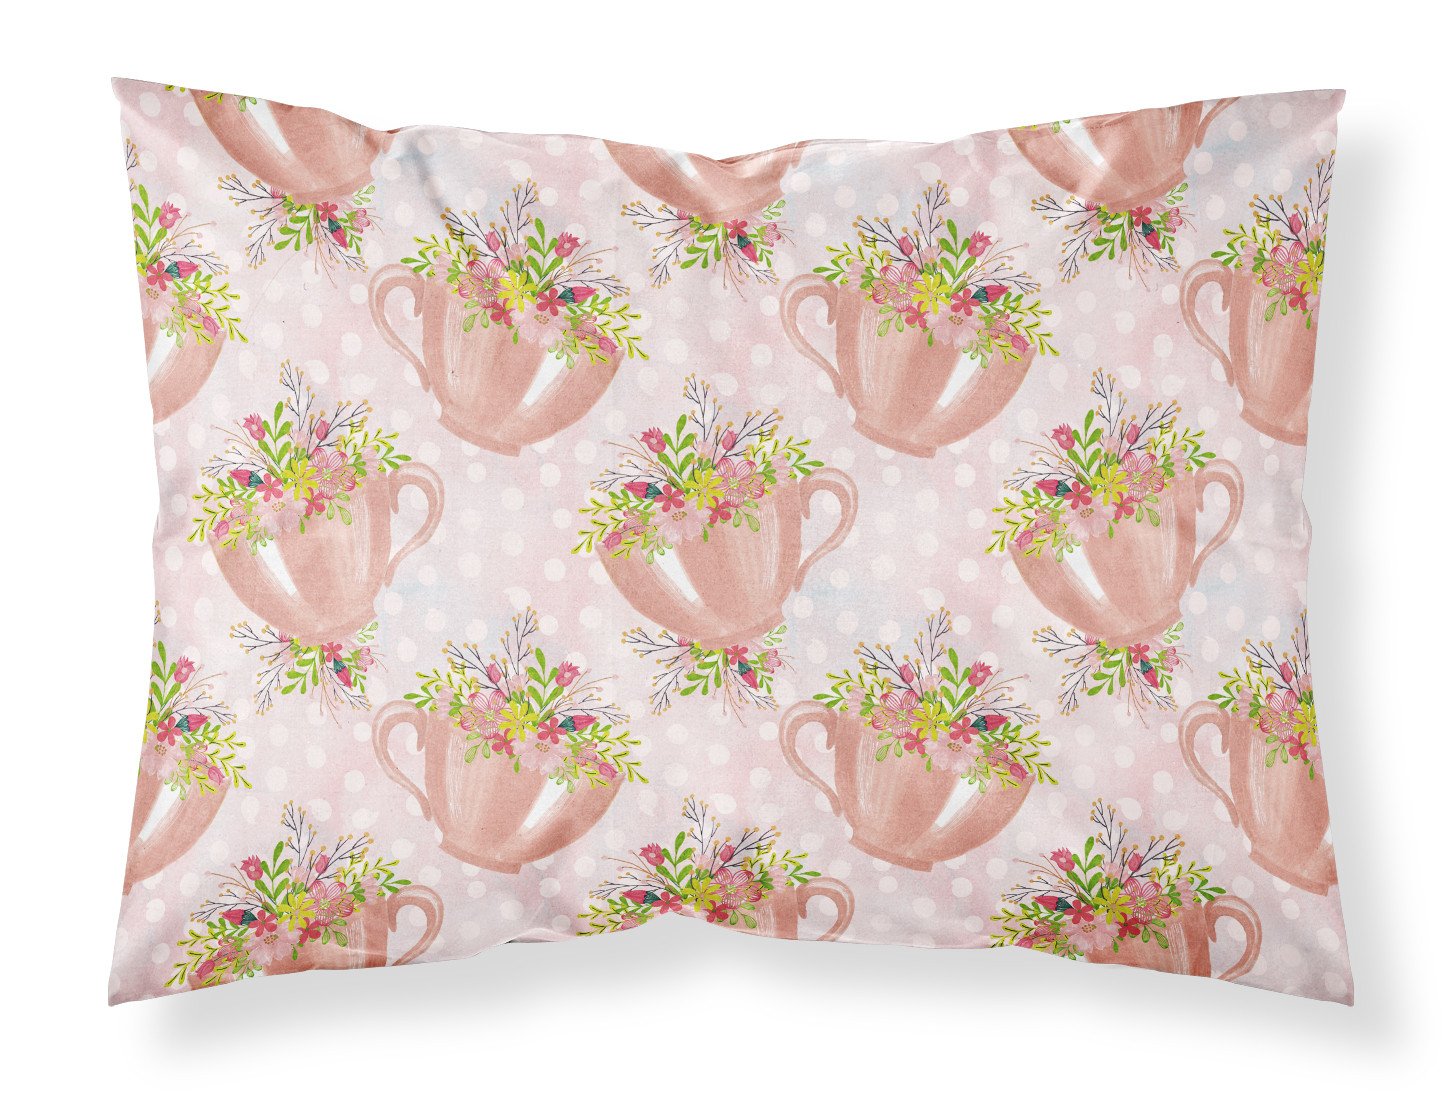 Tea Cup and Flowers Pink Fabric Standard Pillowcase BB7481PILLOWCASE by Caroline's Treasures